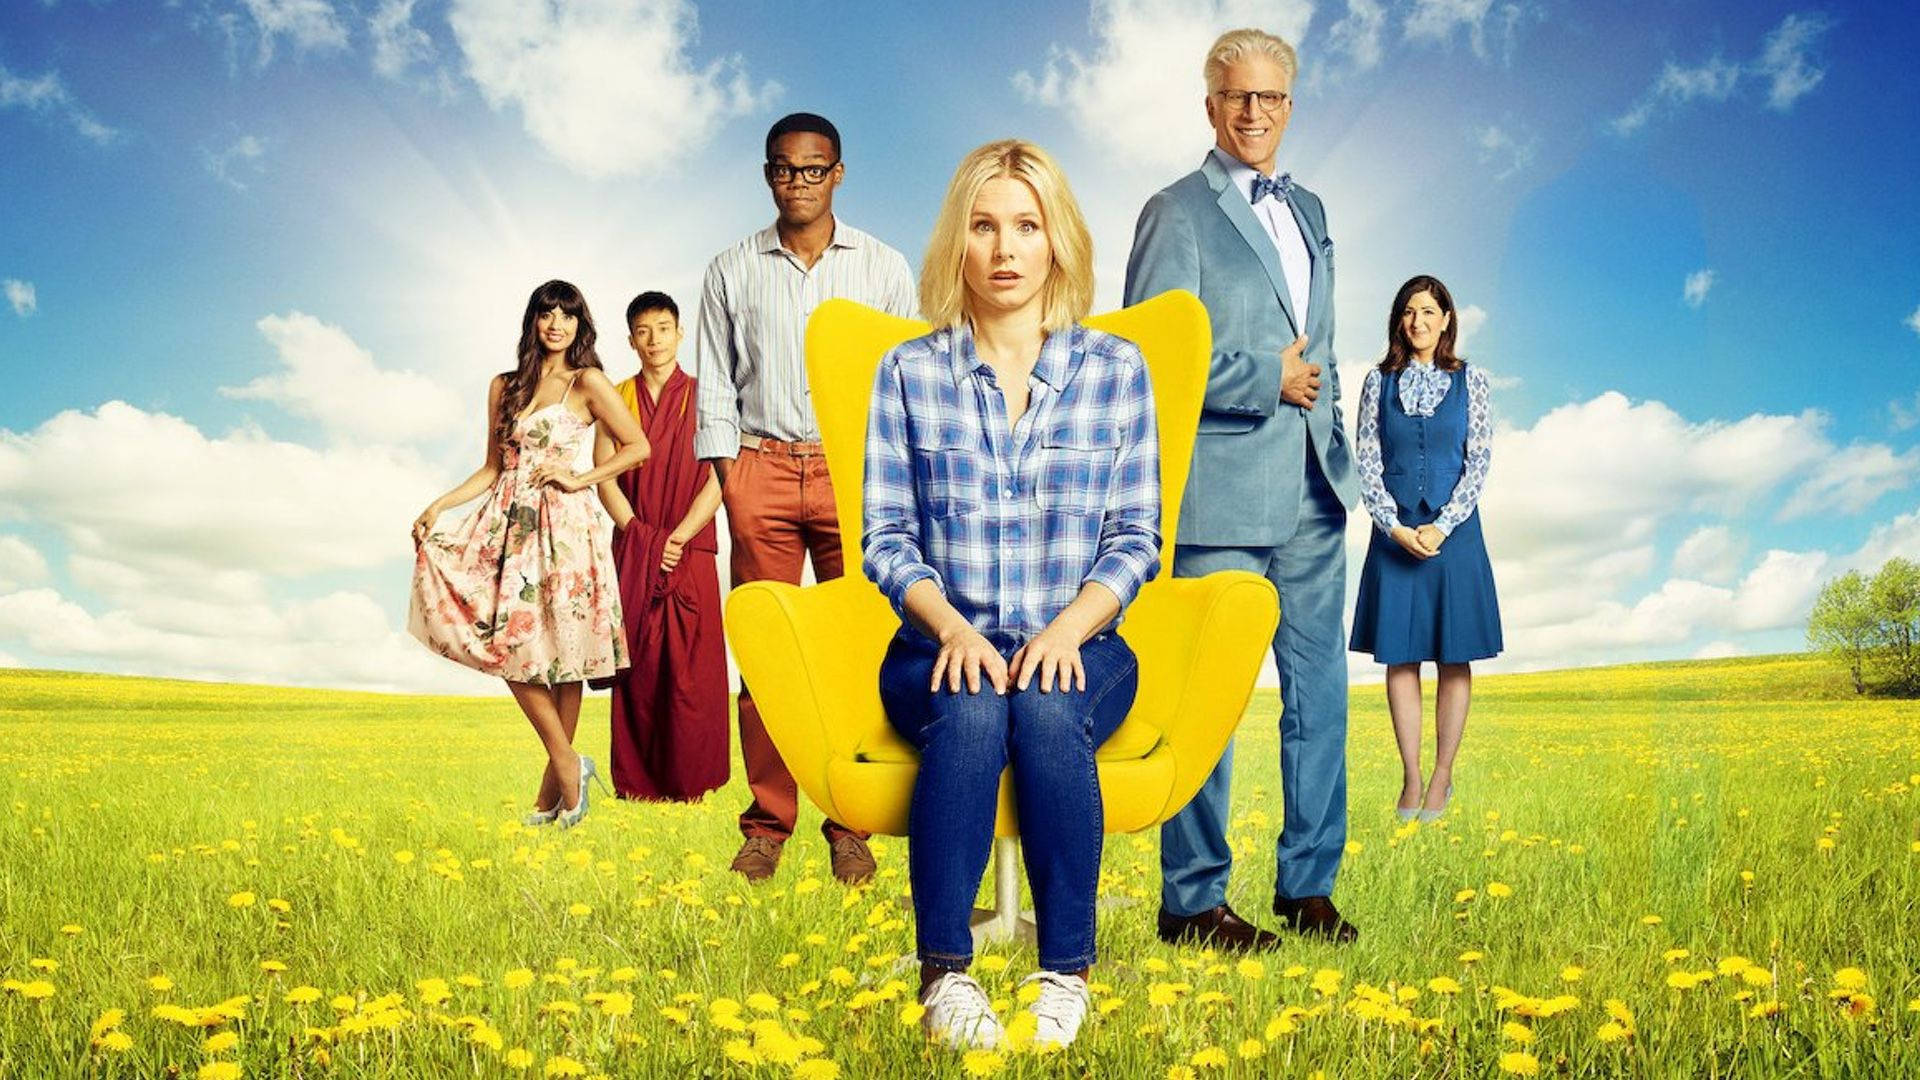 The Good Place Series Poster Background